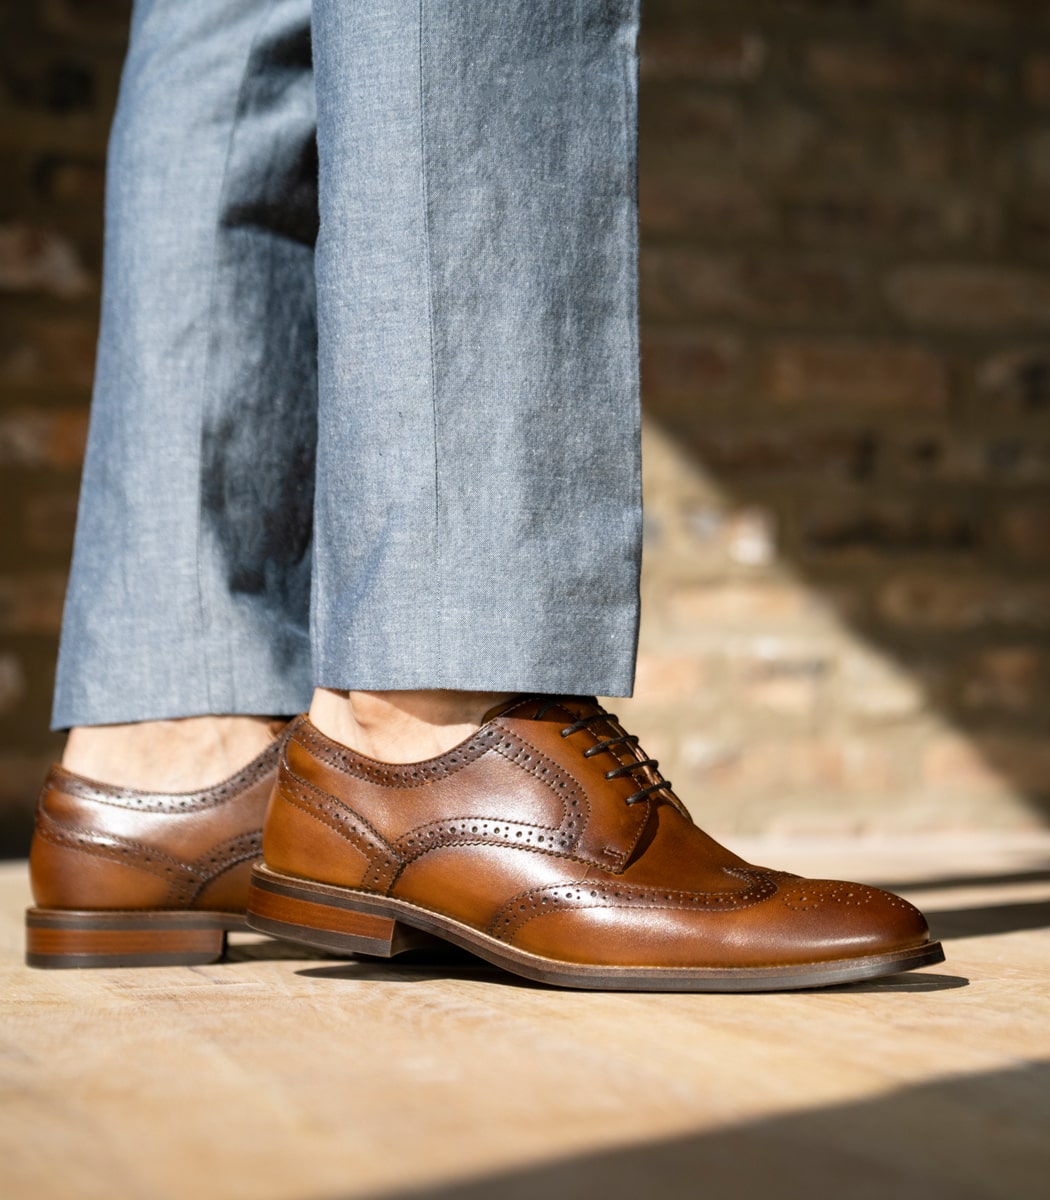 The featured image is a model wearing the Rucci Wingtip Oxford in Cognac. 